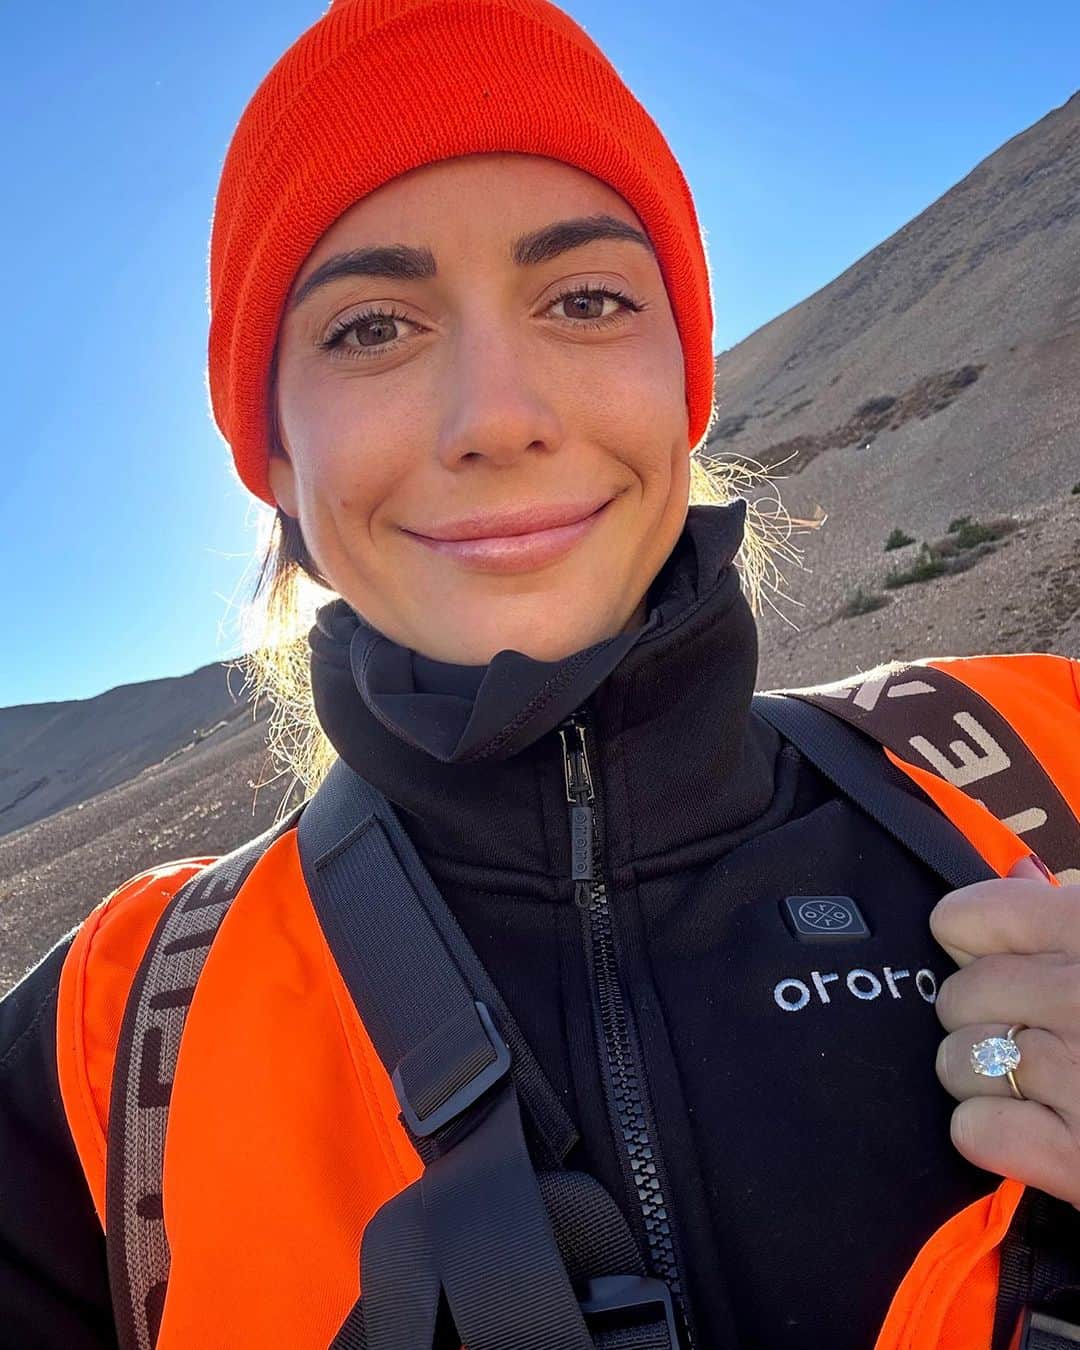 ヴァレンティン・トーマスのインスタグラム：「My first elk hunt was an incredibly demanding physical challenge. On the initial day, we embarked on a grueling 5-mile uphill hike to a vantage point, only to be greeted by a group of college kids mountaineering and blaring music. Their presence and loudness disrupted the valley, rendering our day fruitless. Elk are very smart animals, and they can hear and smell us from really far.   Undeterred, on the second day, we ventured even deeper into the dense and steep forest. I fell hiking down into a drainage and my gun’s butt lodged itself in my upper rib, taking my breath away, and hurting badly when I inhale (still does 😭). Show must go on.  While we saw older signs of elk activity, the abundance of bear poop suggested that the elk had vacated the area, as they tend to avoid bears. Nevertheless, we decided to hide in the bushes near a water pond where we saw relatively fresh elk (and bear) prints until dawn, hopeful that an elk might return. Unfortunately, our patience was unrewarded, and as darkness fell, we completed the final few miles of our already arduous 12-mile journey.  Day three compelled us to explore yet another location, ascending to a viewpoint overlooking a vast valley. We patiently waited for hours, desperately hoping for any sign of movement emerging from the woods. Exhausted and disheartened, we concluded another day without even catching a glimpse of an elk. To be continued tomorrow! @mtn_chandler IS THE MOUNTAIN MAN. @danielf86 @ororo.wear I don’t know what I would have done without your heated stuff 🥹」